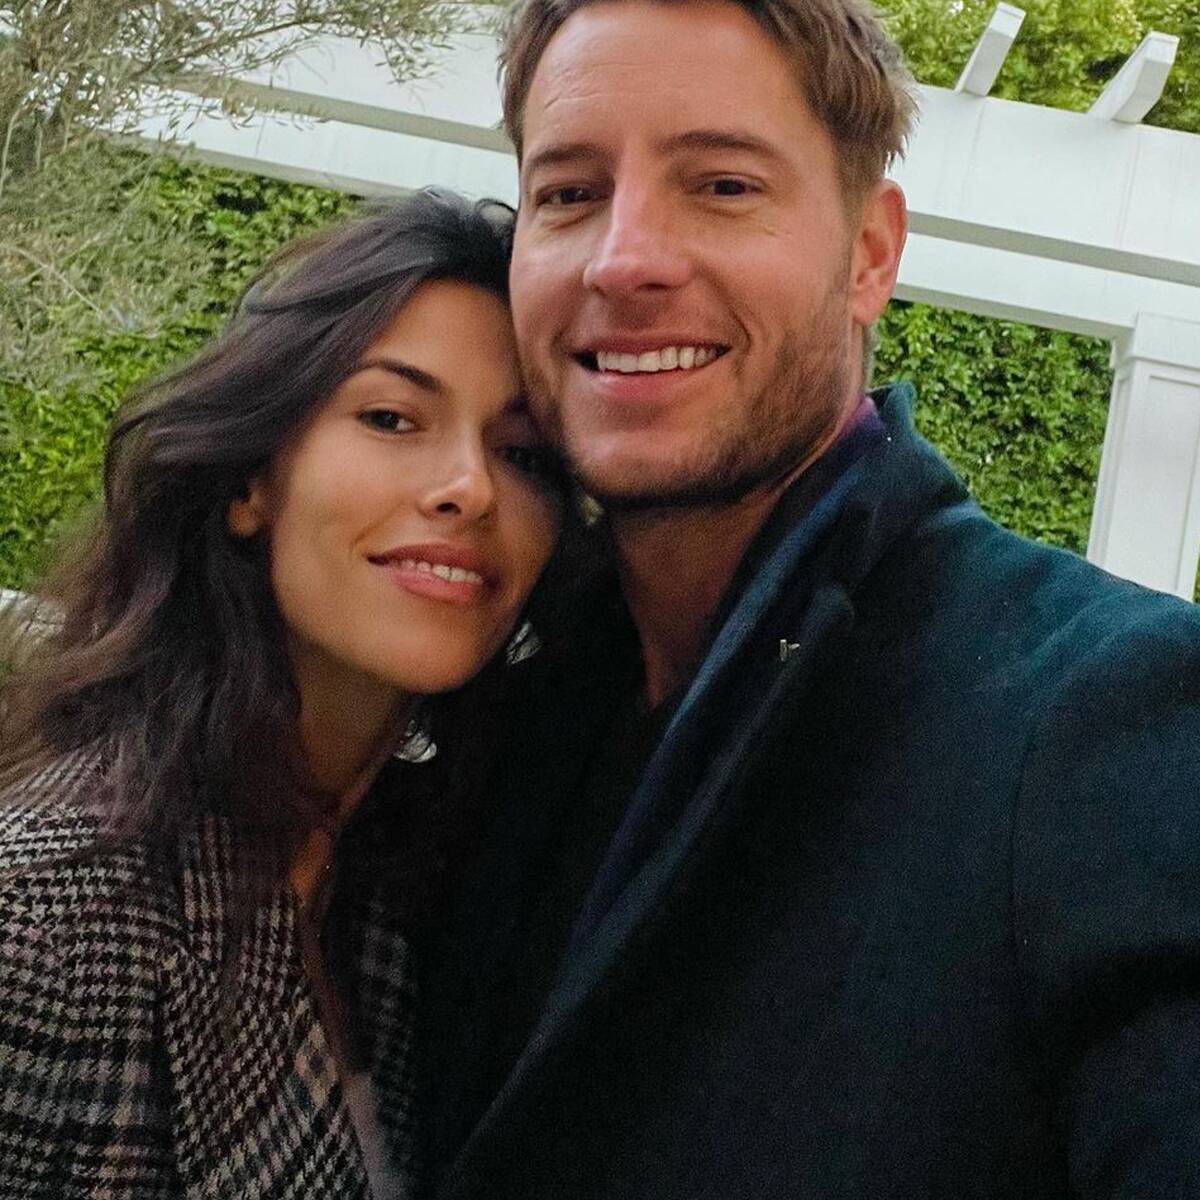 Sofia Pernas Says Justin Hartley "Lights Up My Sky" in Sweet Birthday Shoutout